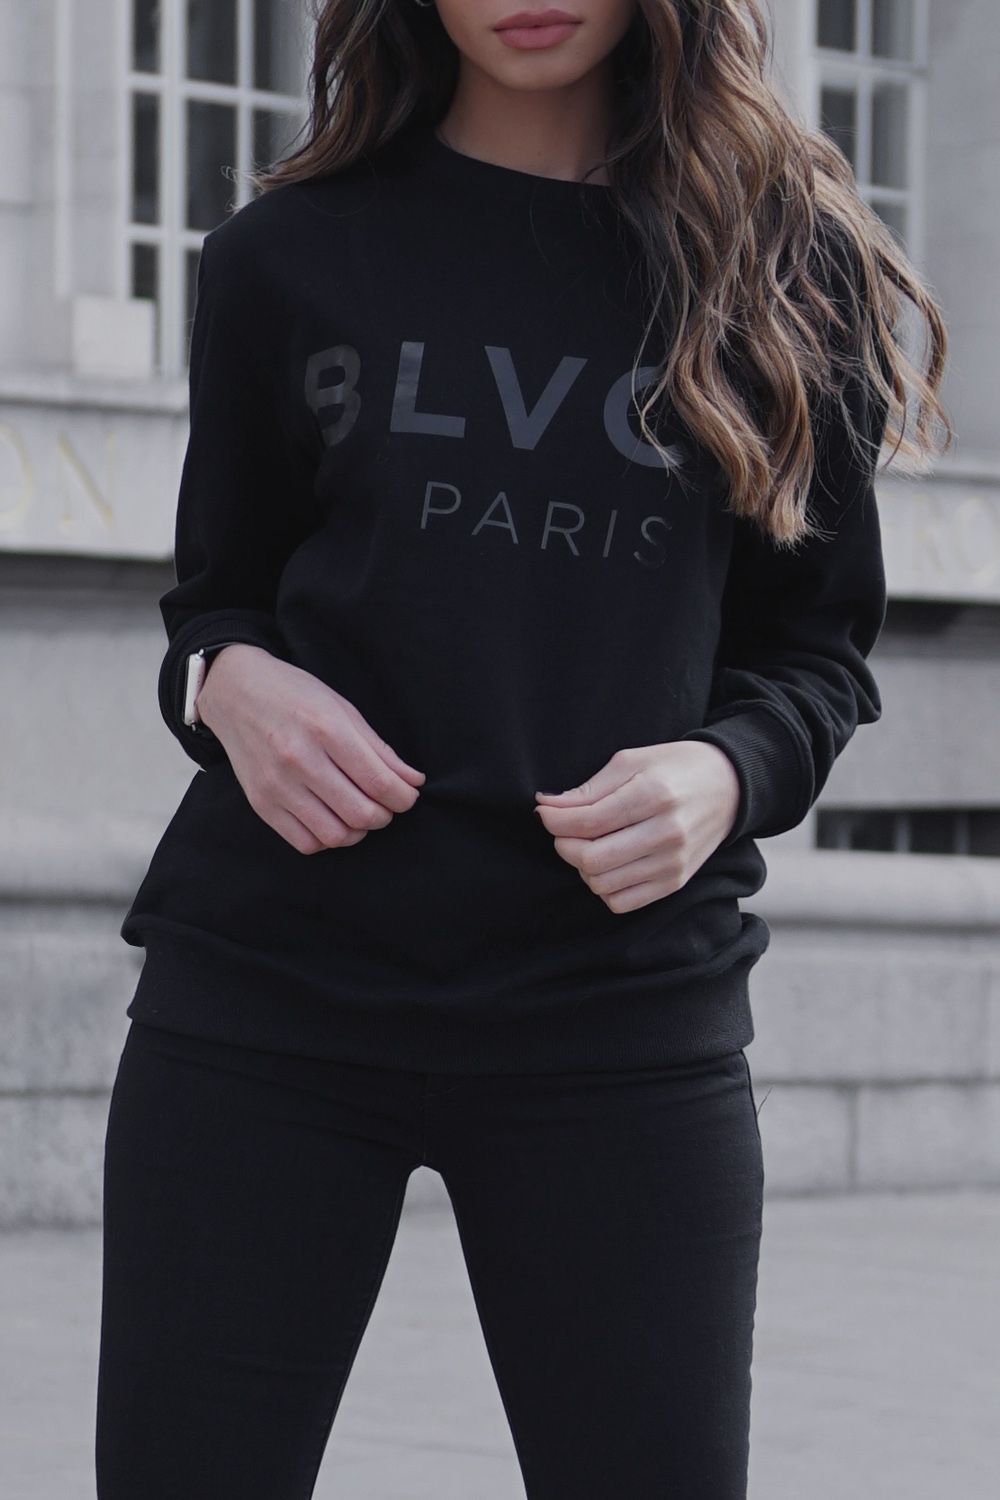 Blvck on black sweater. Black girl outfits, Wearing all black, Cap outfits for women